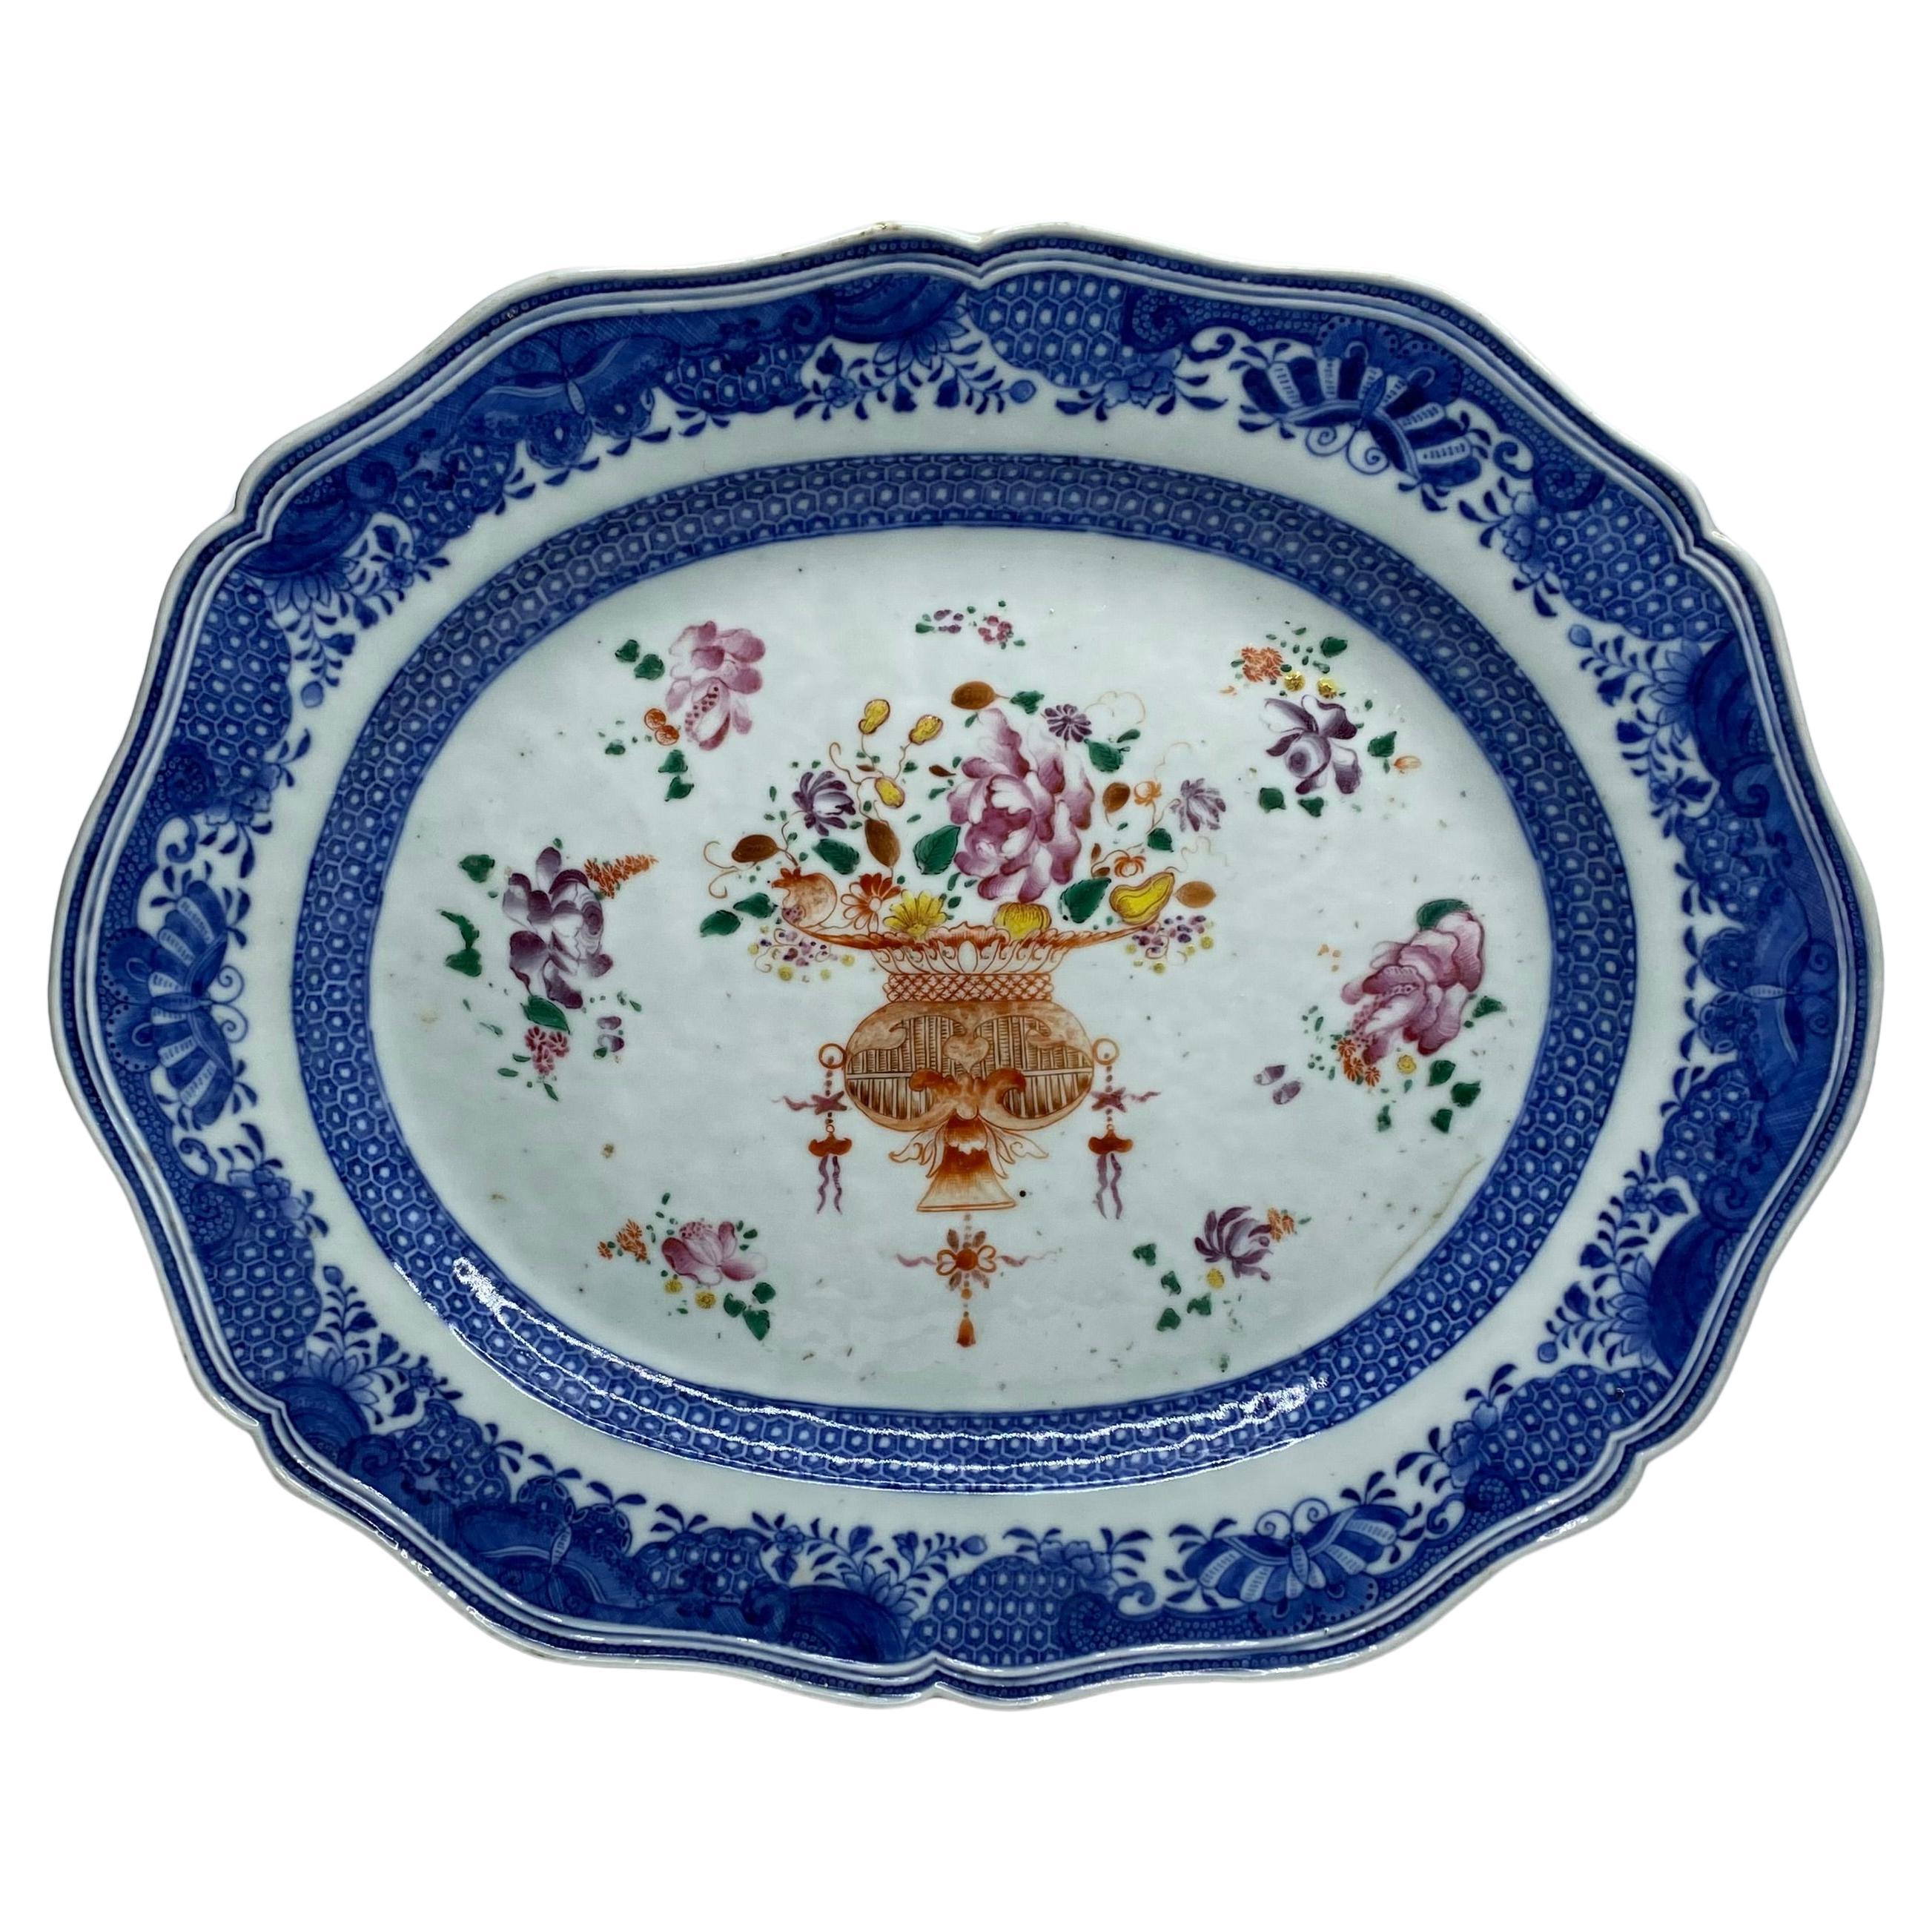 Chinese porcelain platter, Famille rose, c. 1760. Qianlong Period. For Sale